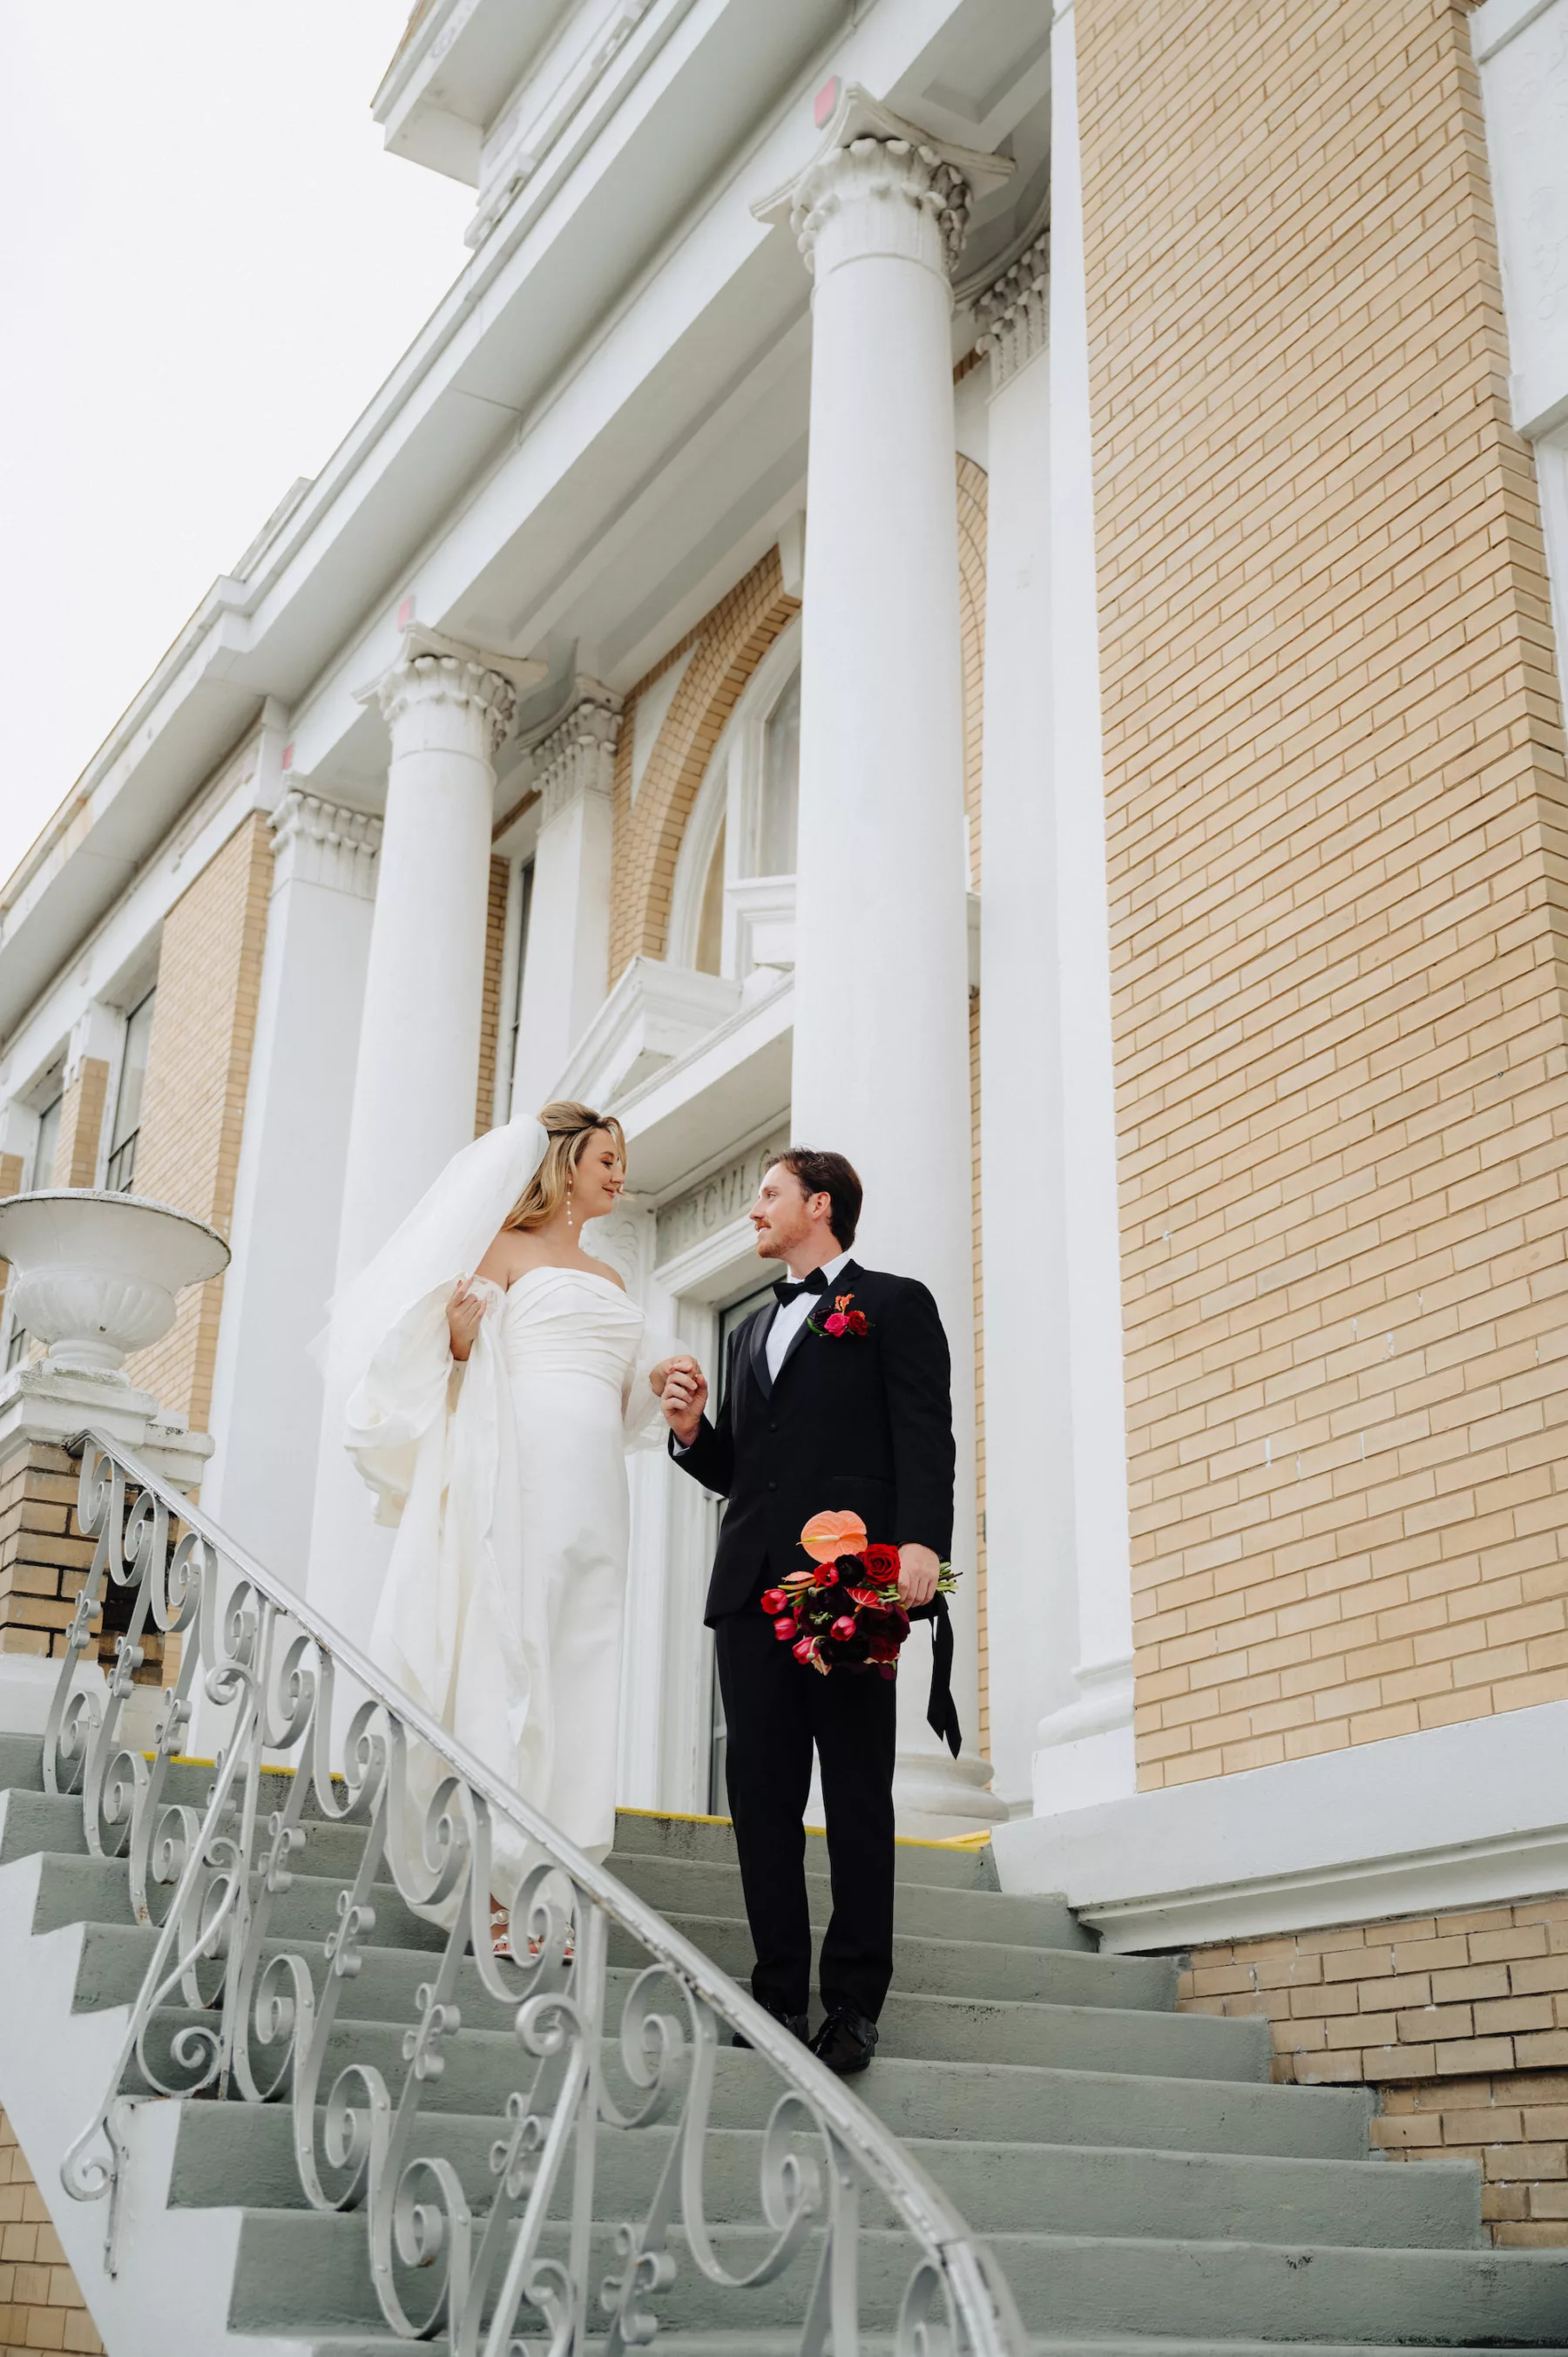 Bride and Groom Walking Down Stairs Wedding Portrait | Historic Ybor Event Venue Cuban Club | Tampa Bay Photographer McNeile Photography | Content Creator Behind The Vows